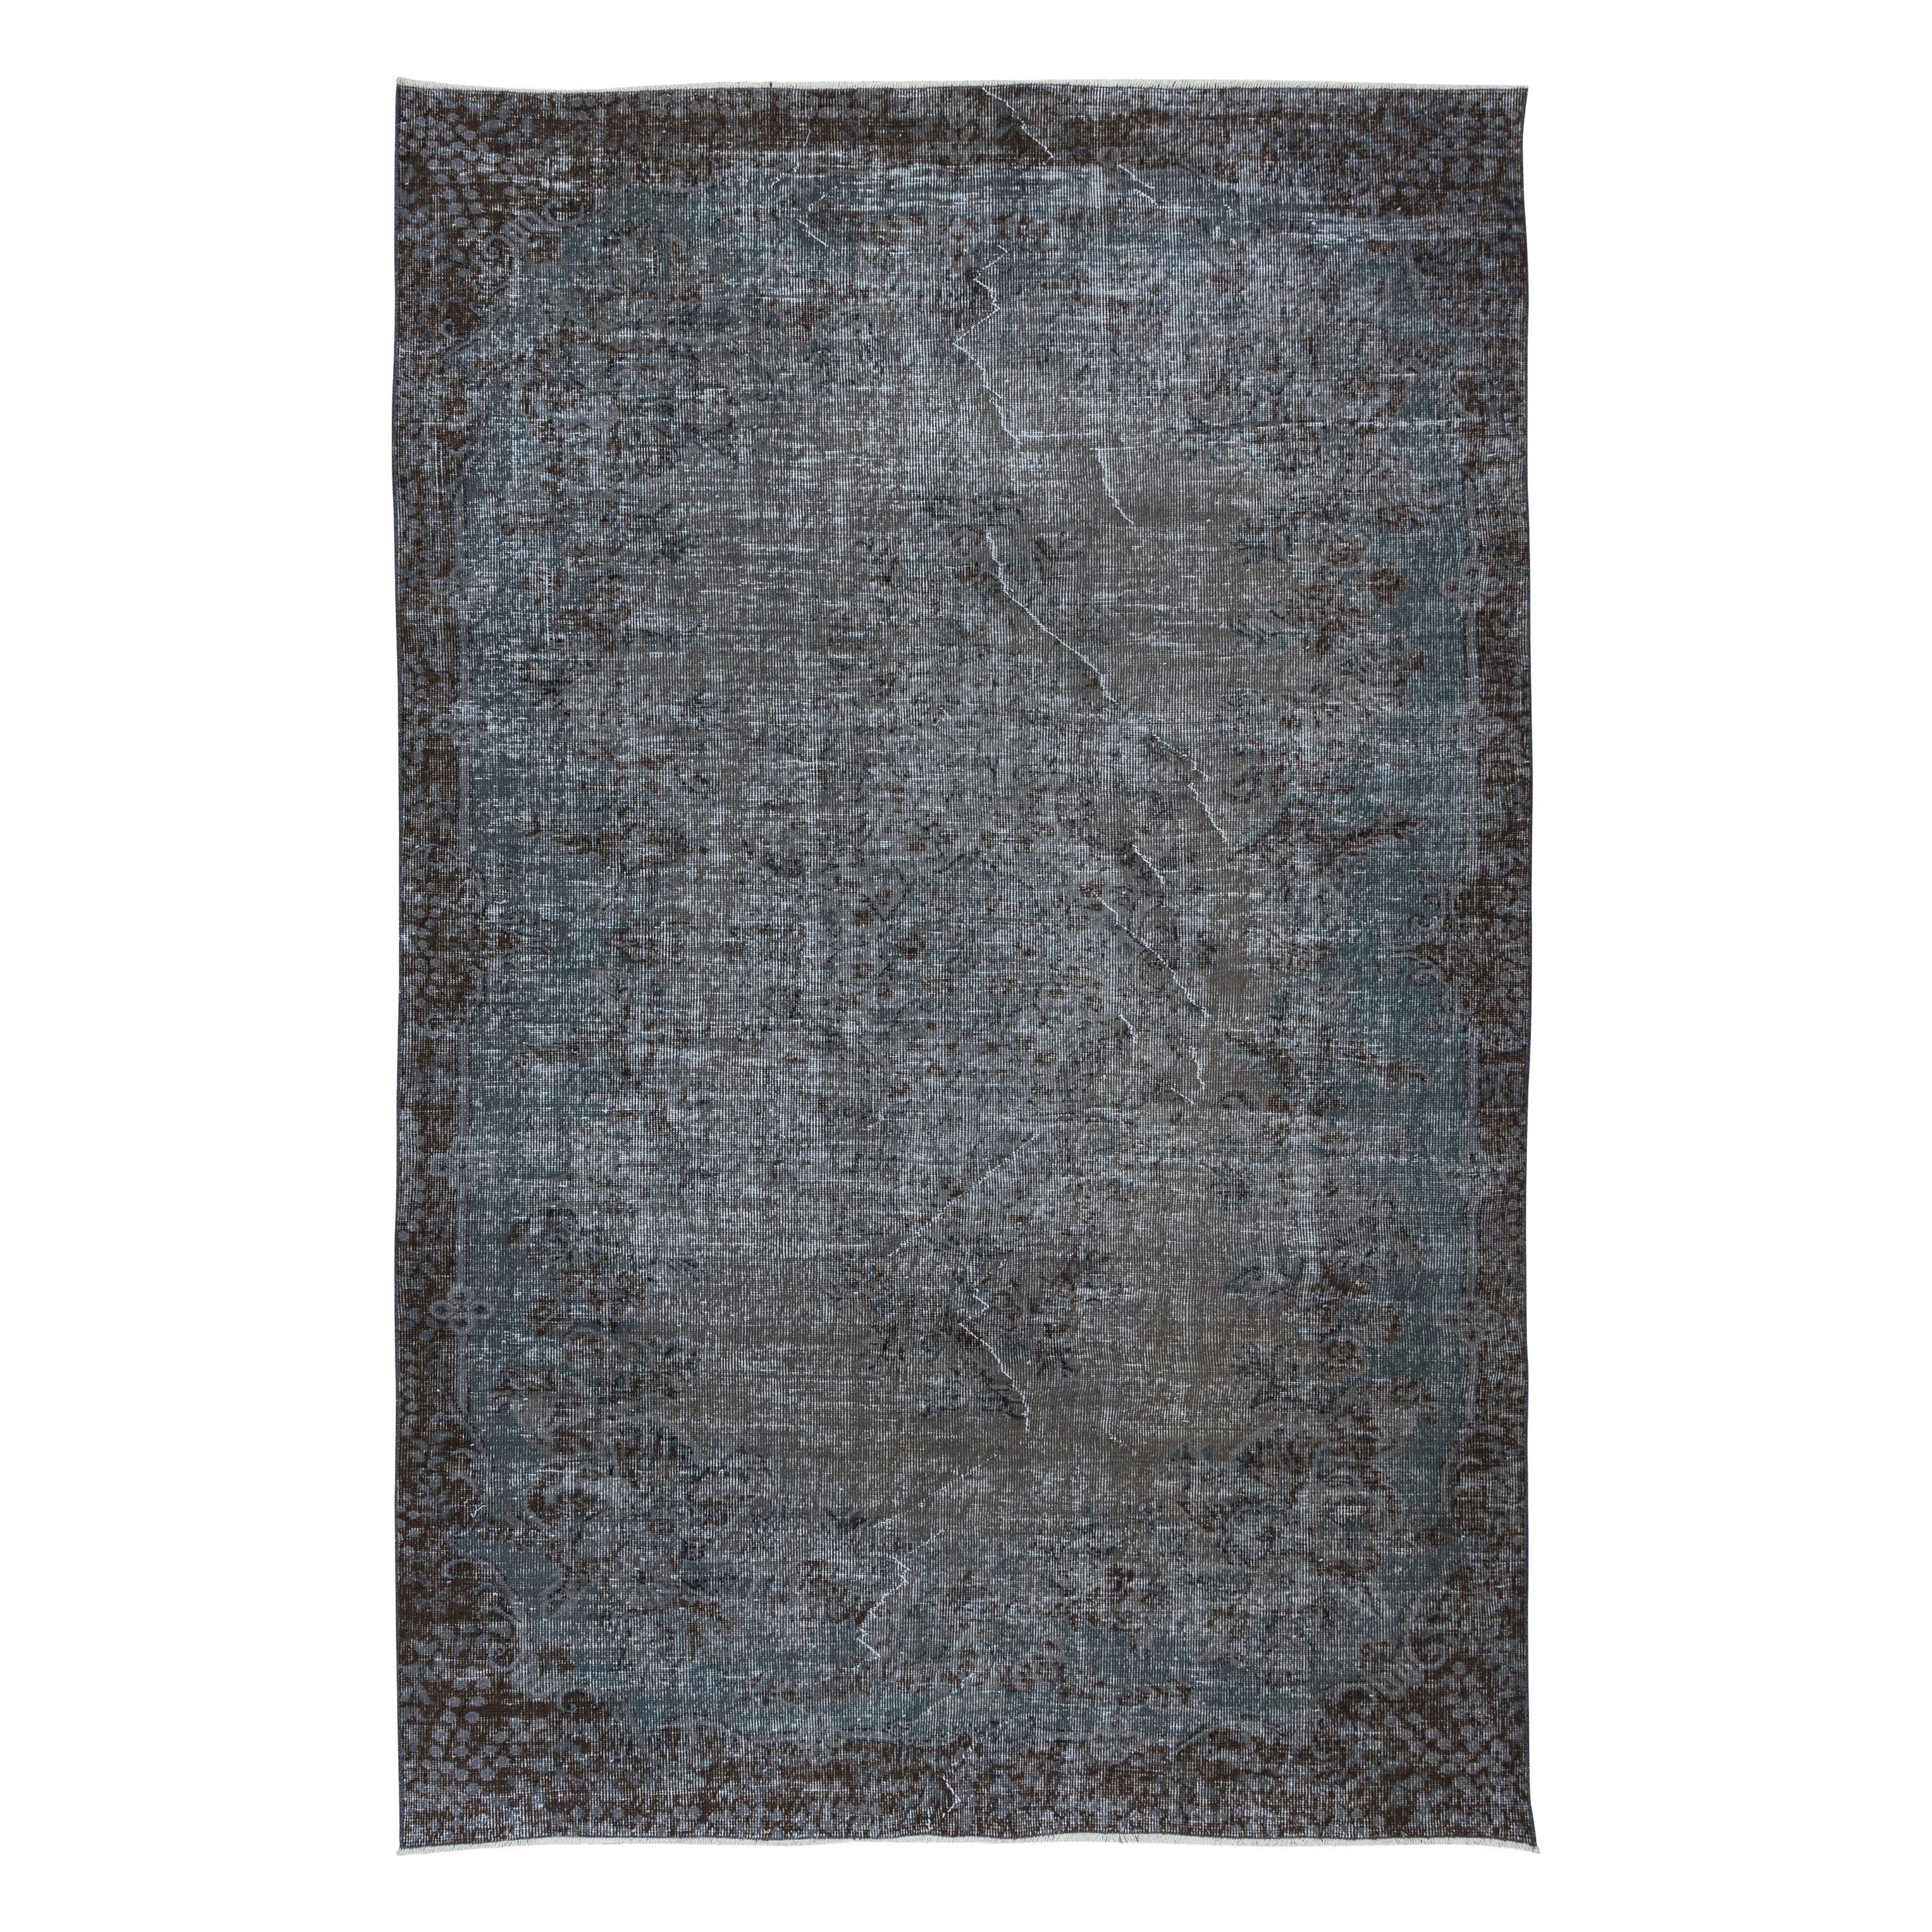 6x9.4 Ft Modern Handmade Turkish Area Rug in Pure Gray, Brown and Bluish Gray For Sale